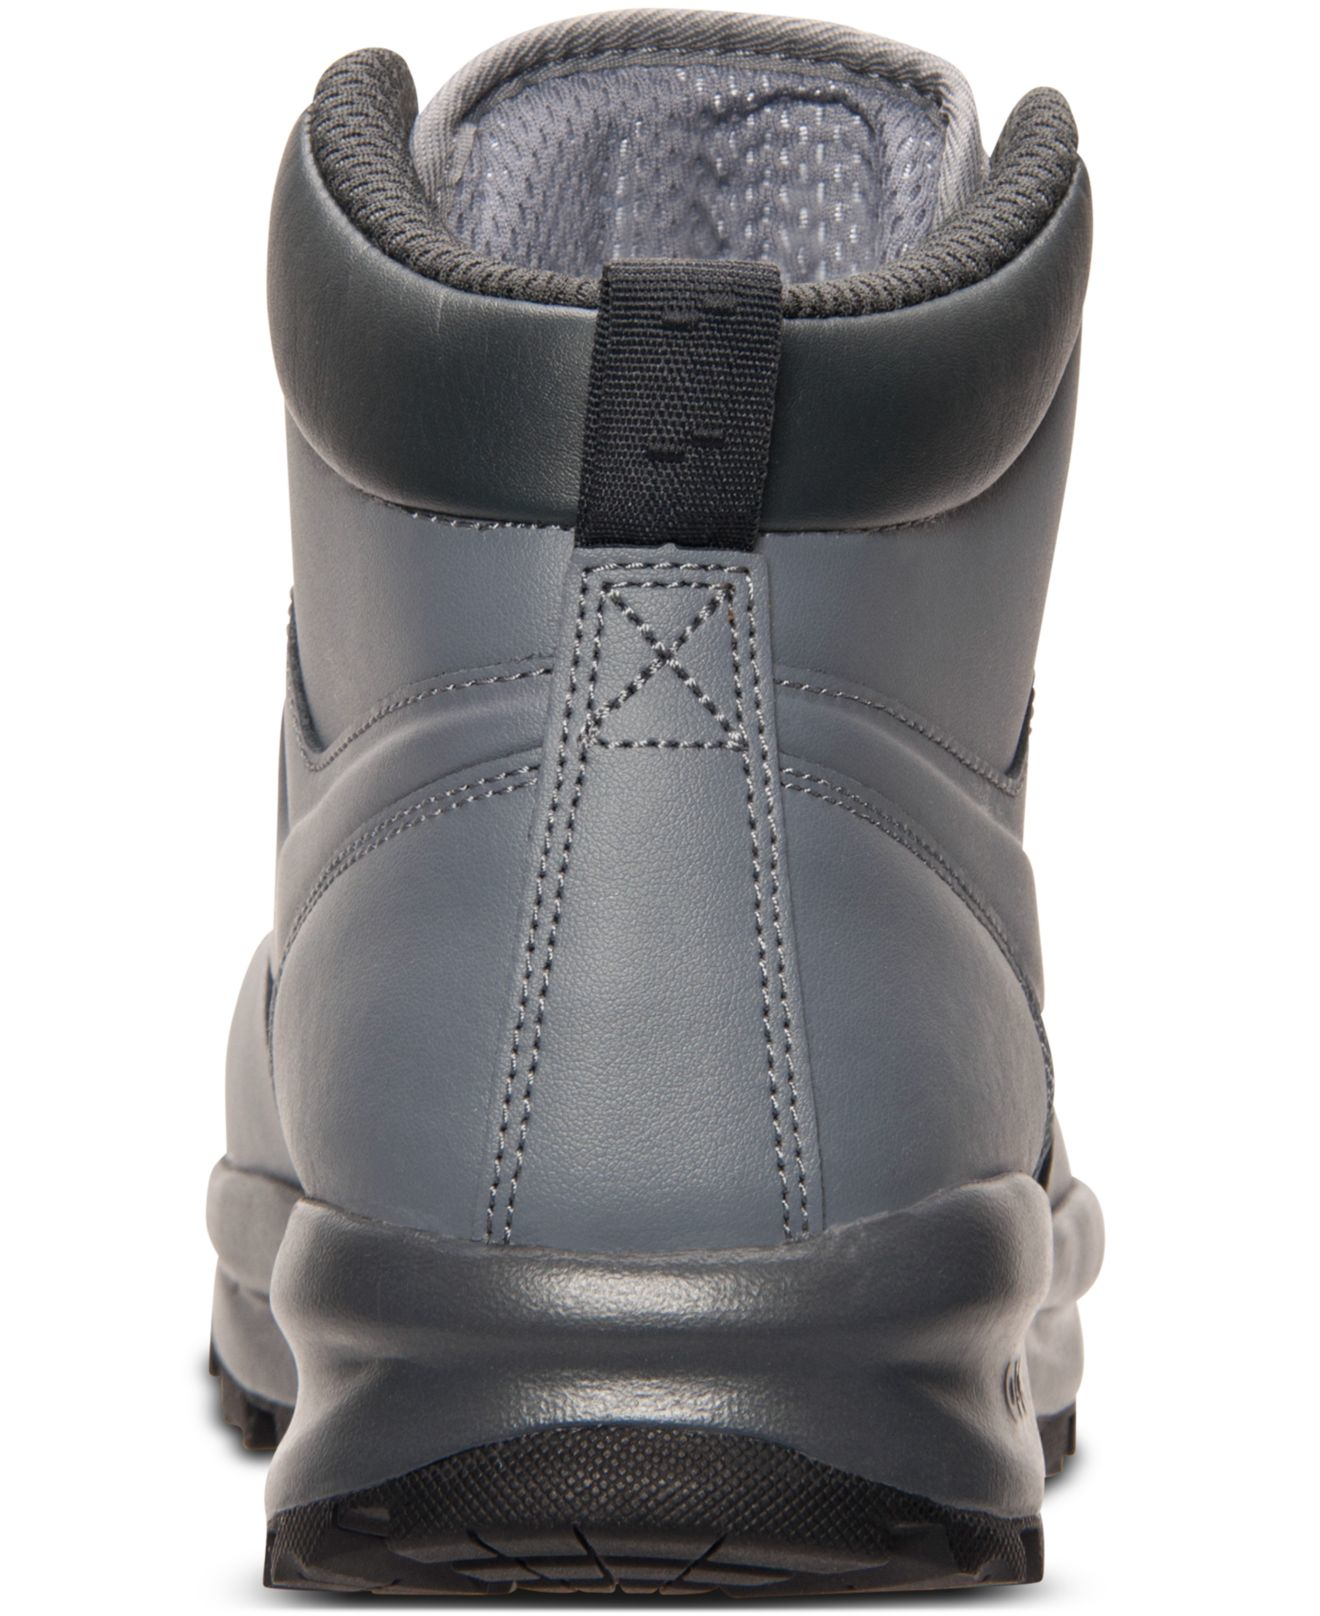 Lyst - Nike Men's Manoa Leather Boots From Finish Line in Gray for Men